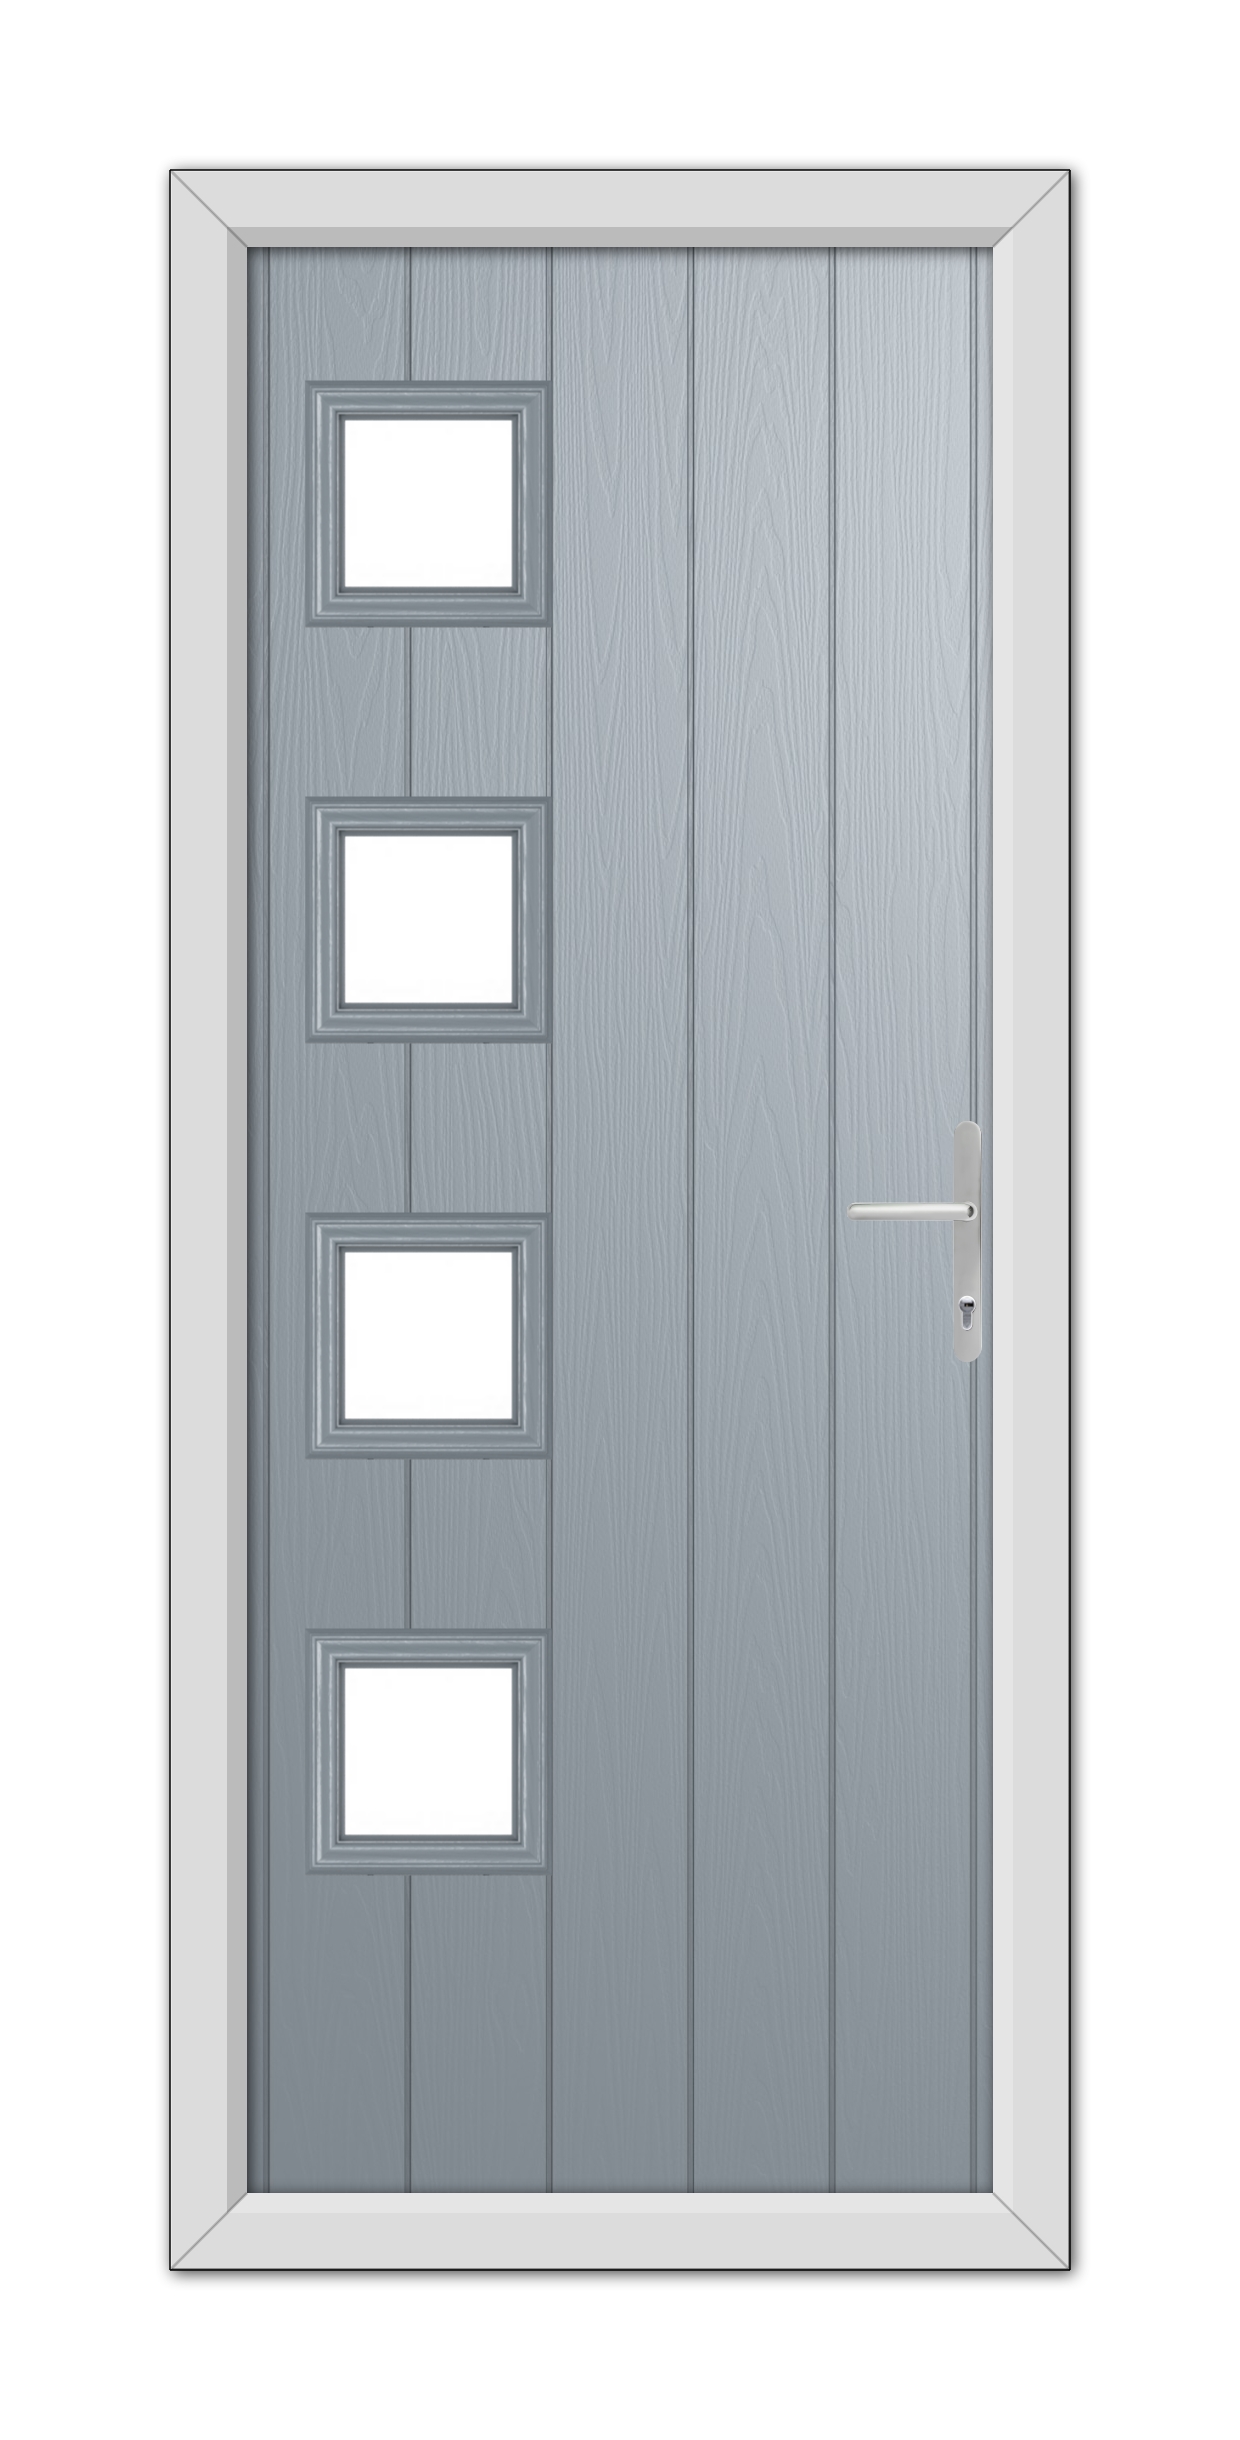 A French Grey Sussex Composite Door featuring a vertical wood grain pattern with four rectangular glass panels and a silver handle, set in a white frame.